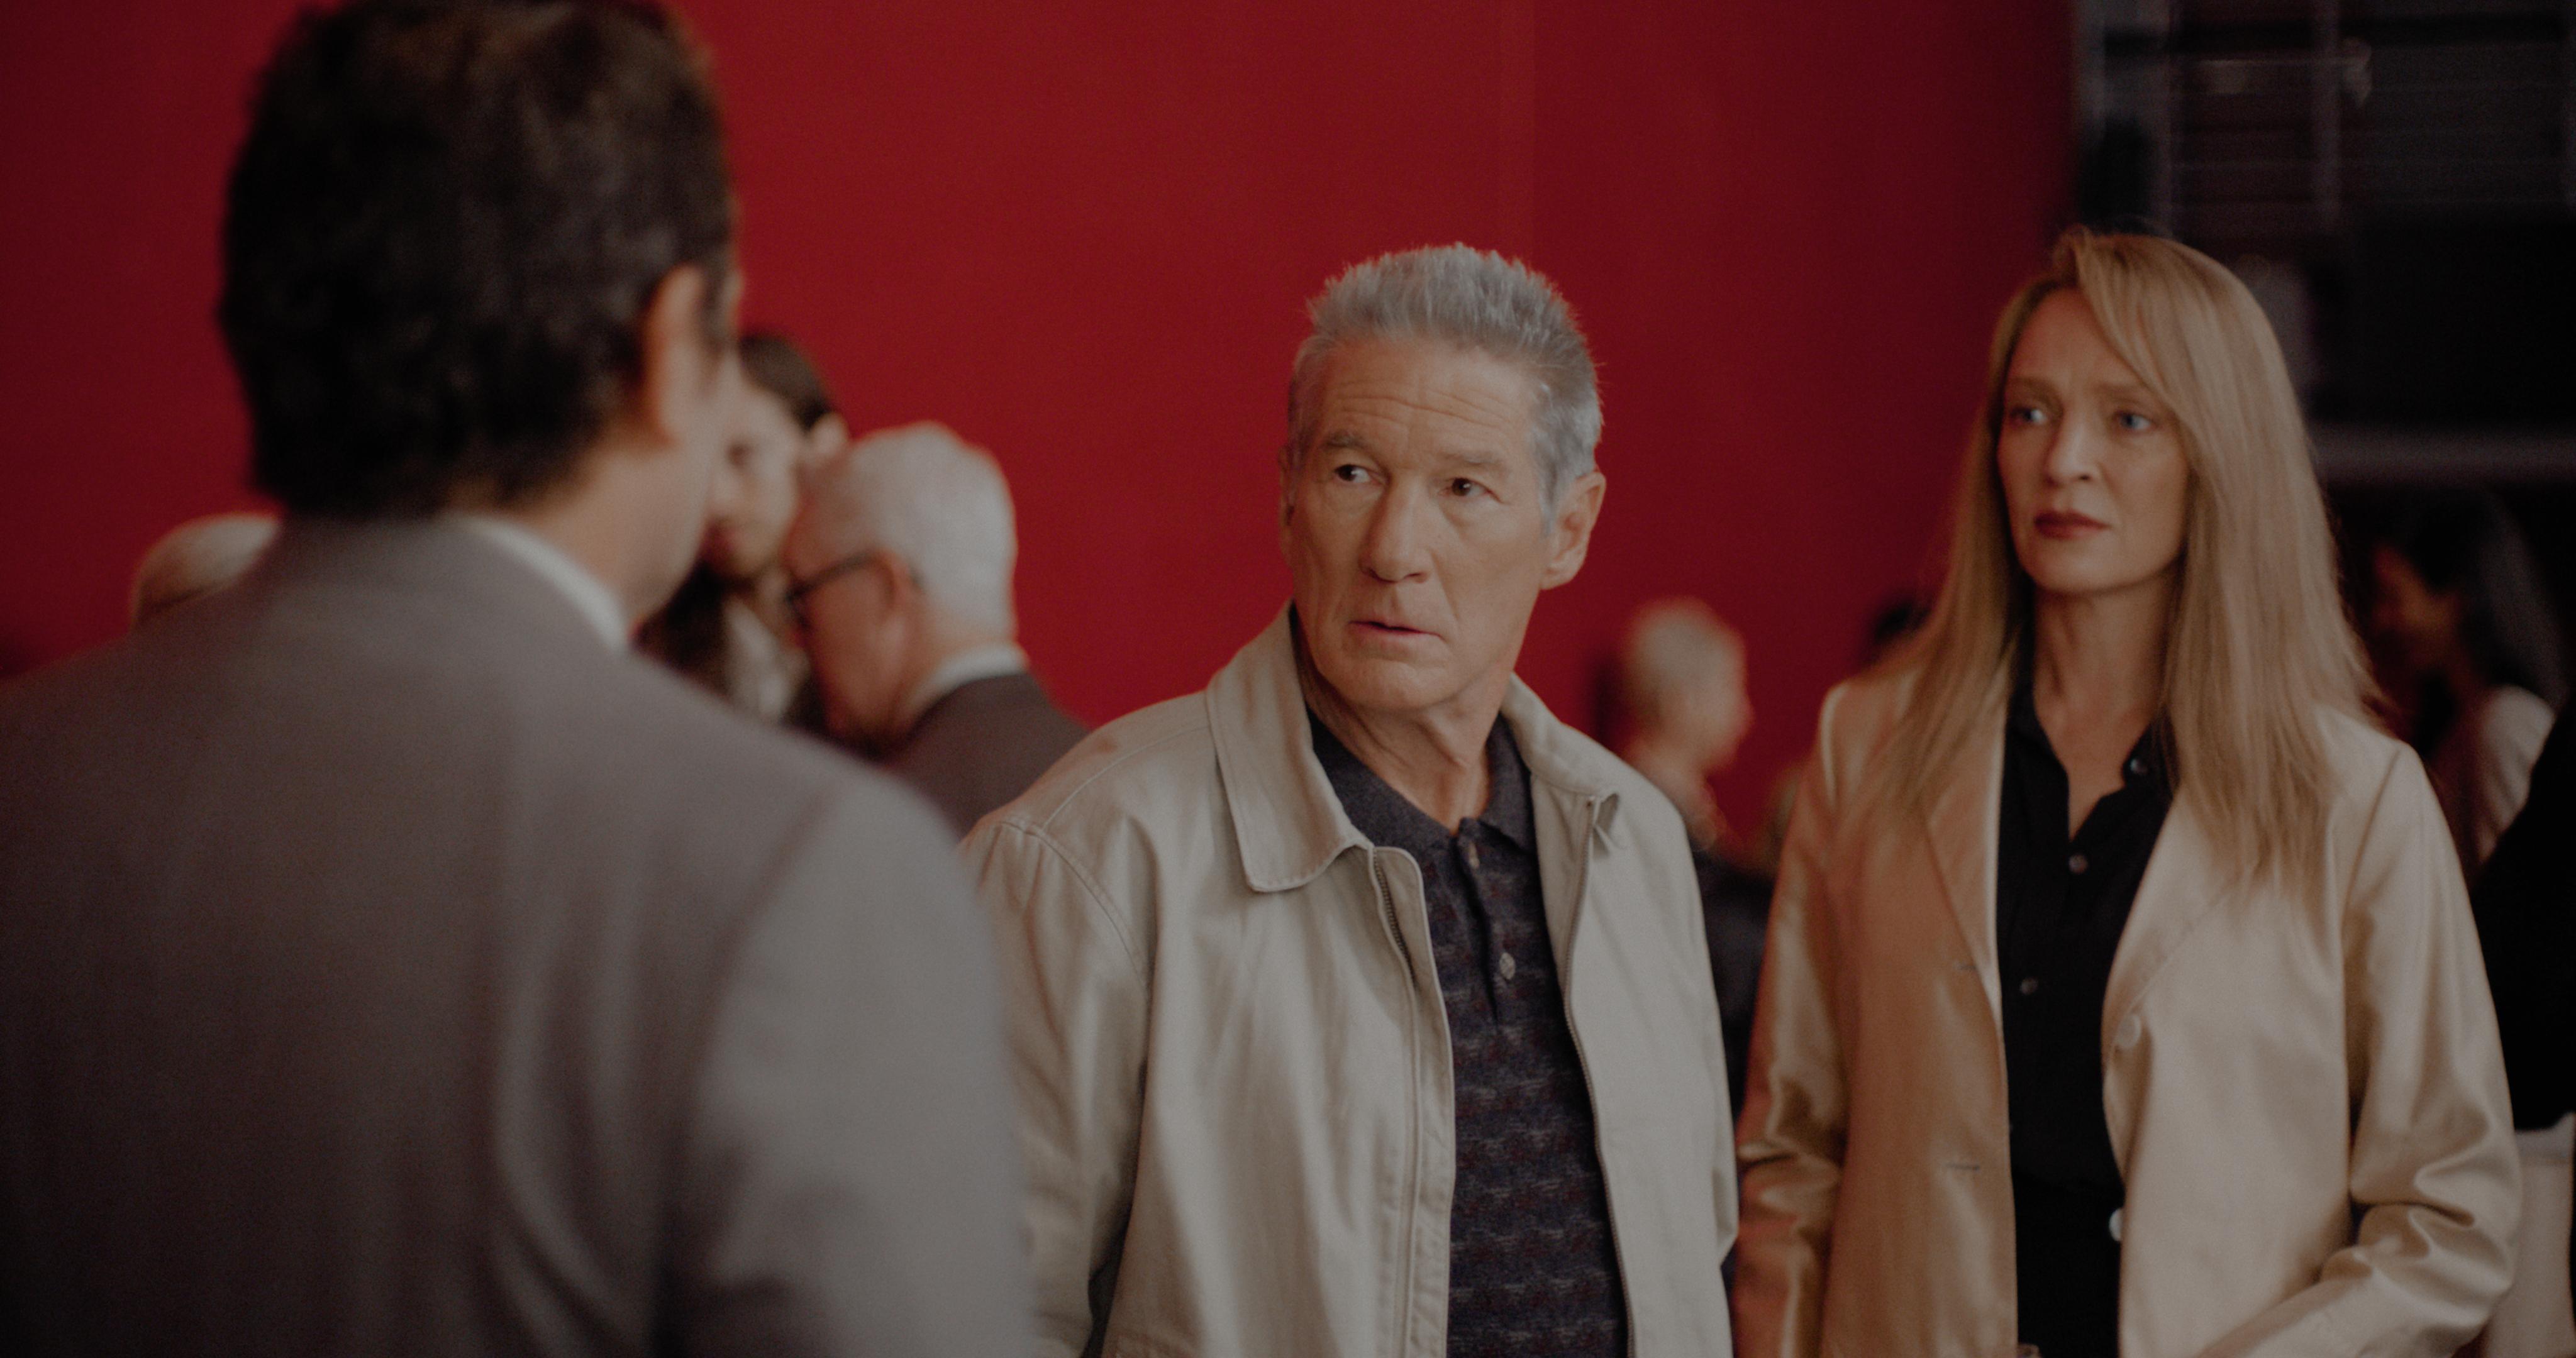 ‘Oh, Canada’ Review: Richard Gere And His ‘American Gigolo’ Filmmaker Paul Schrader Reunite For Reflective Drama About Truth...